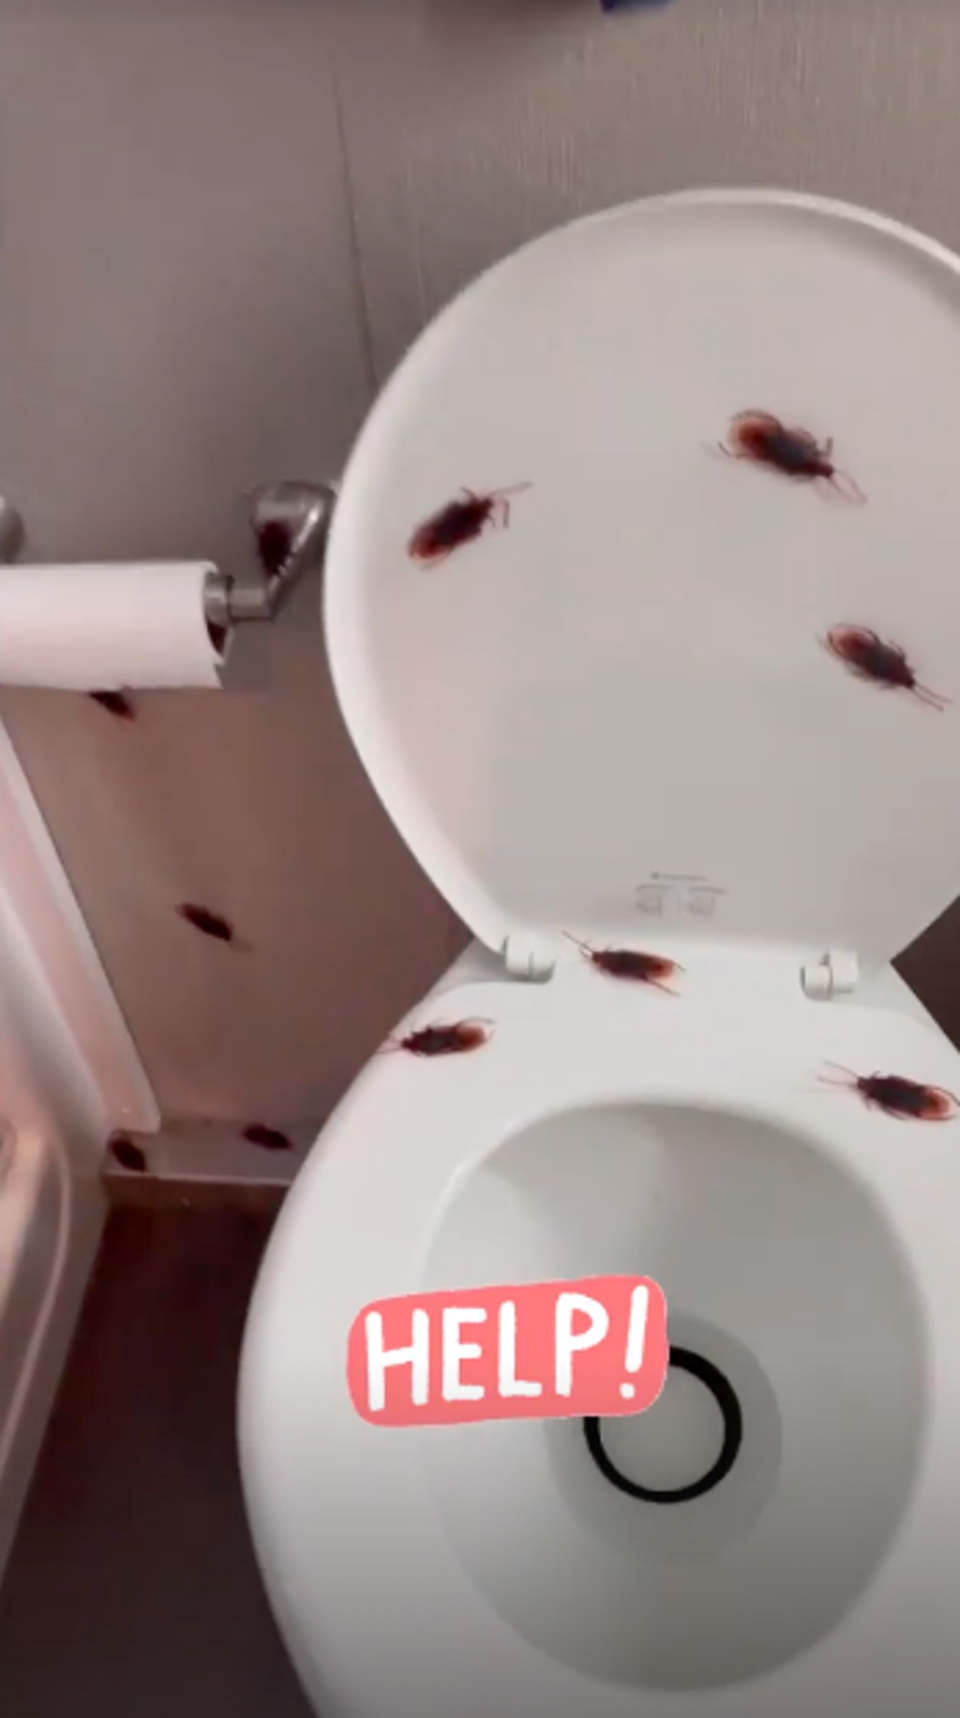 Kaley Cuoco screamed when she first saw her bathroom covered in the toy insects (Instagram)